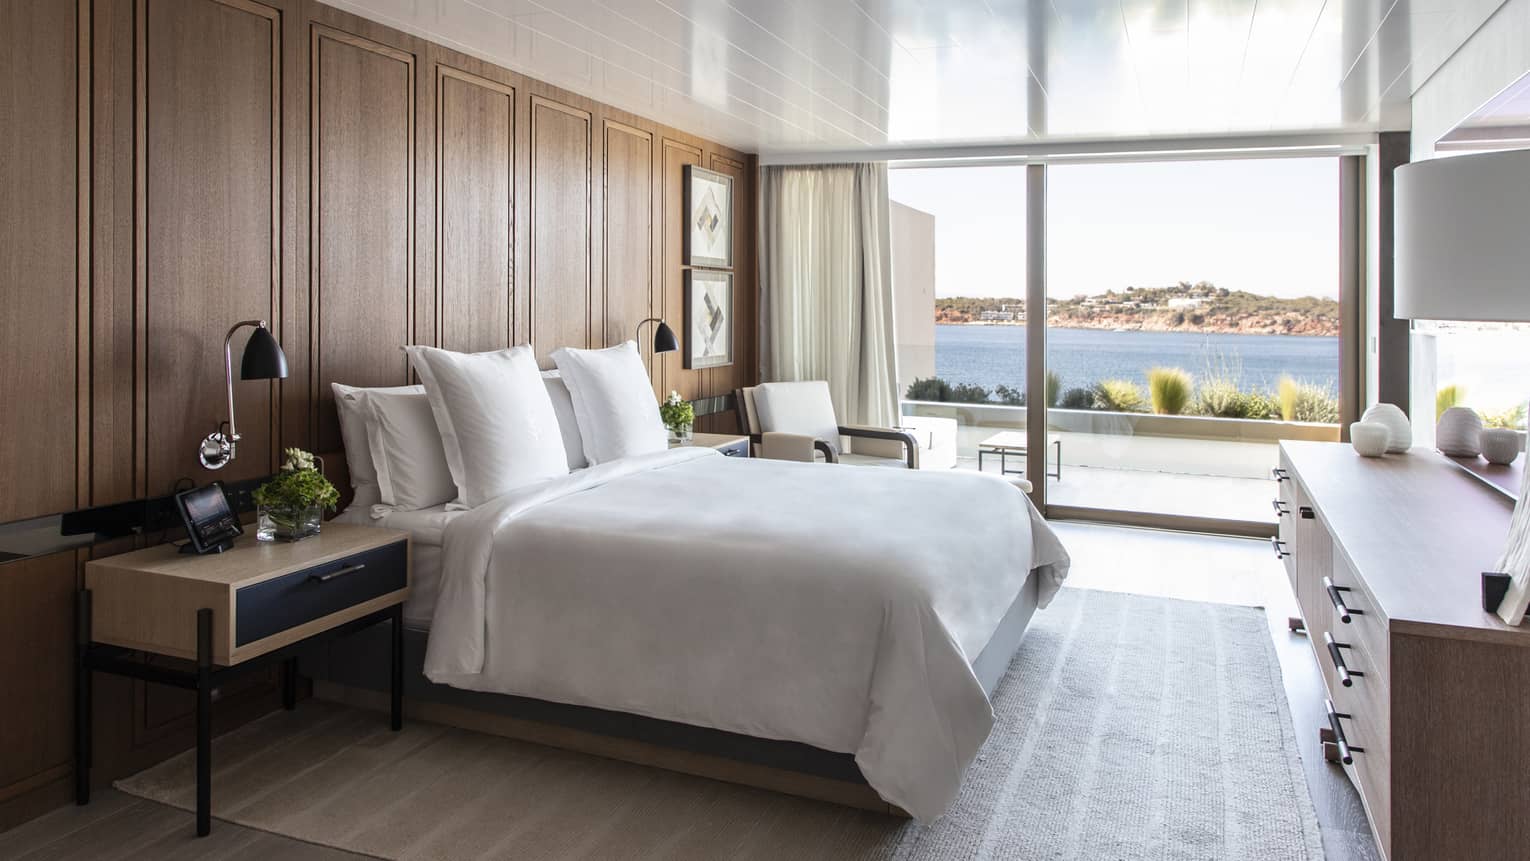 White king bed, wooden accent wall, contemporary night stand and dresser, wall of windows with sea view